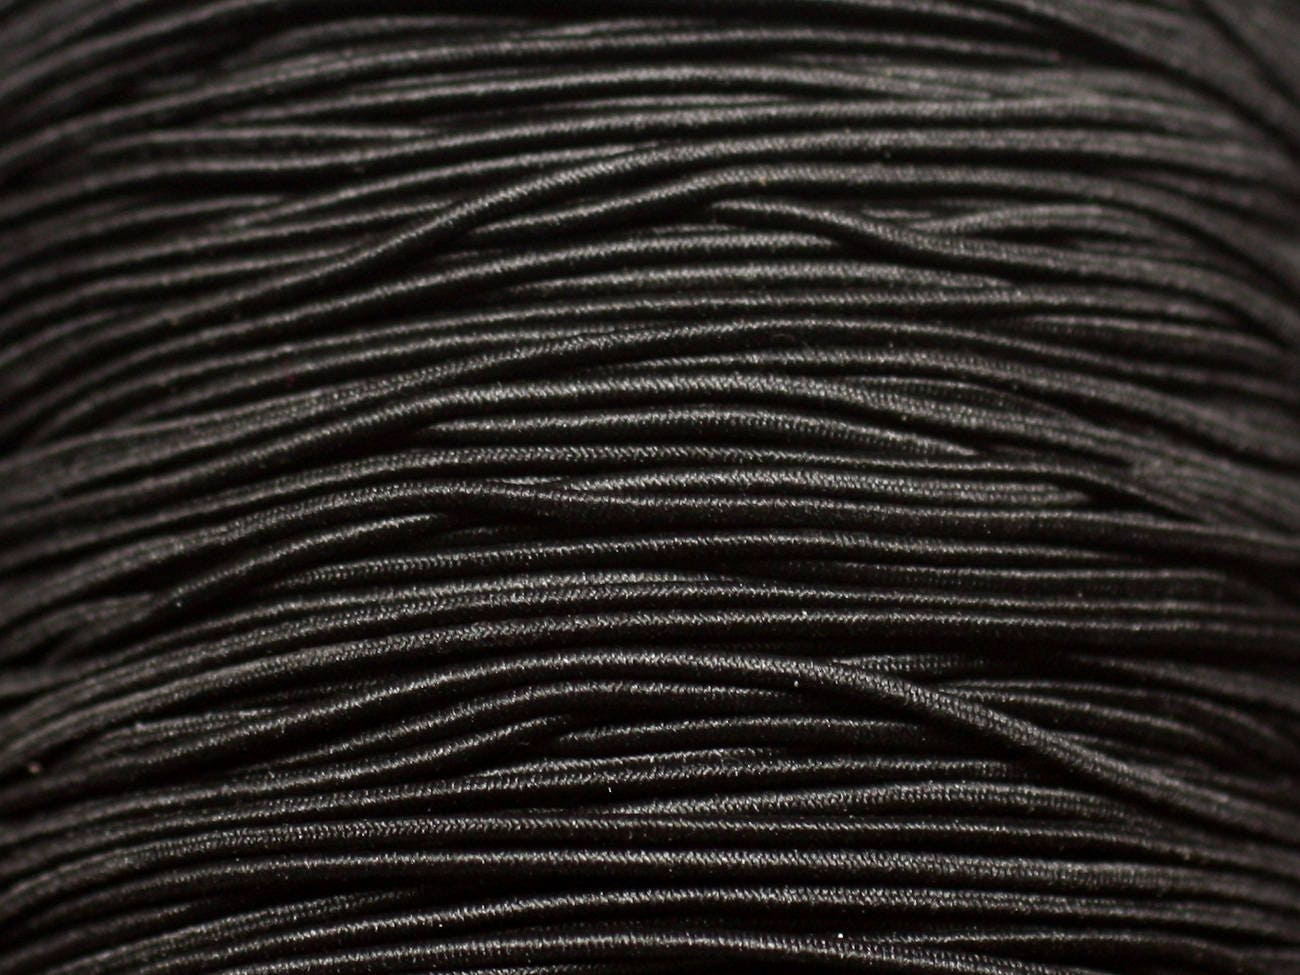 Round Thin Cord Elastic - Full Roll (100 Meters) - 1mm Black or White –  ThreadandTrimmings